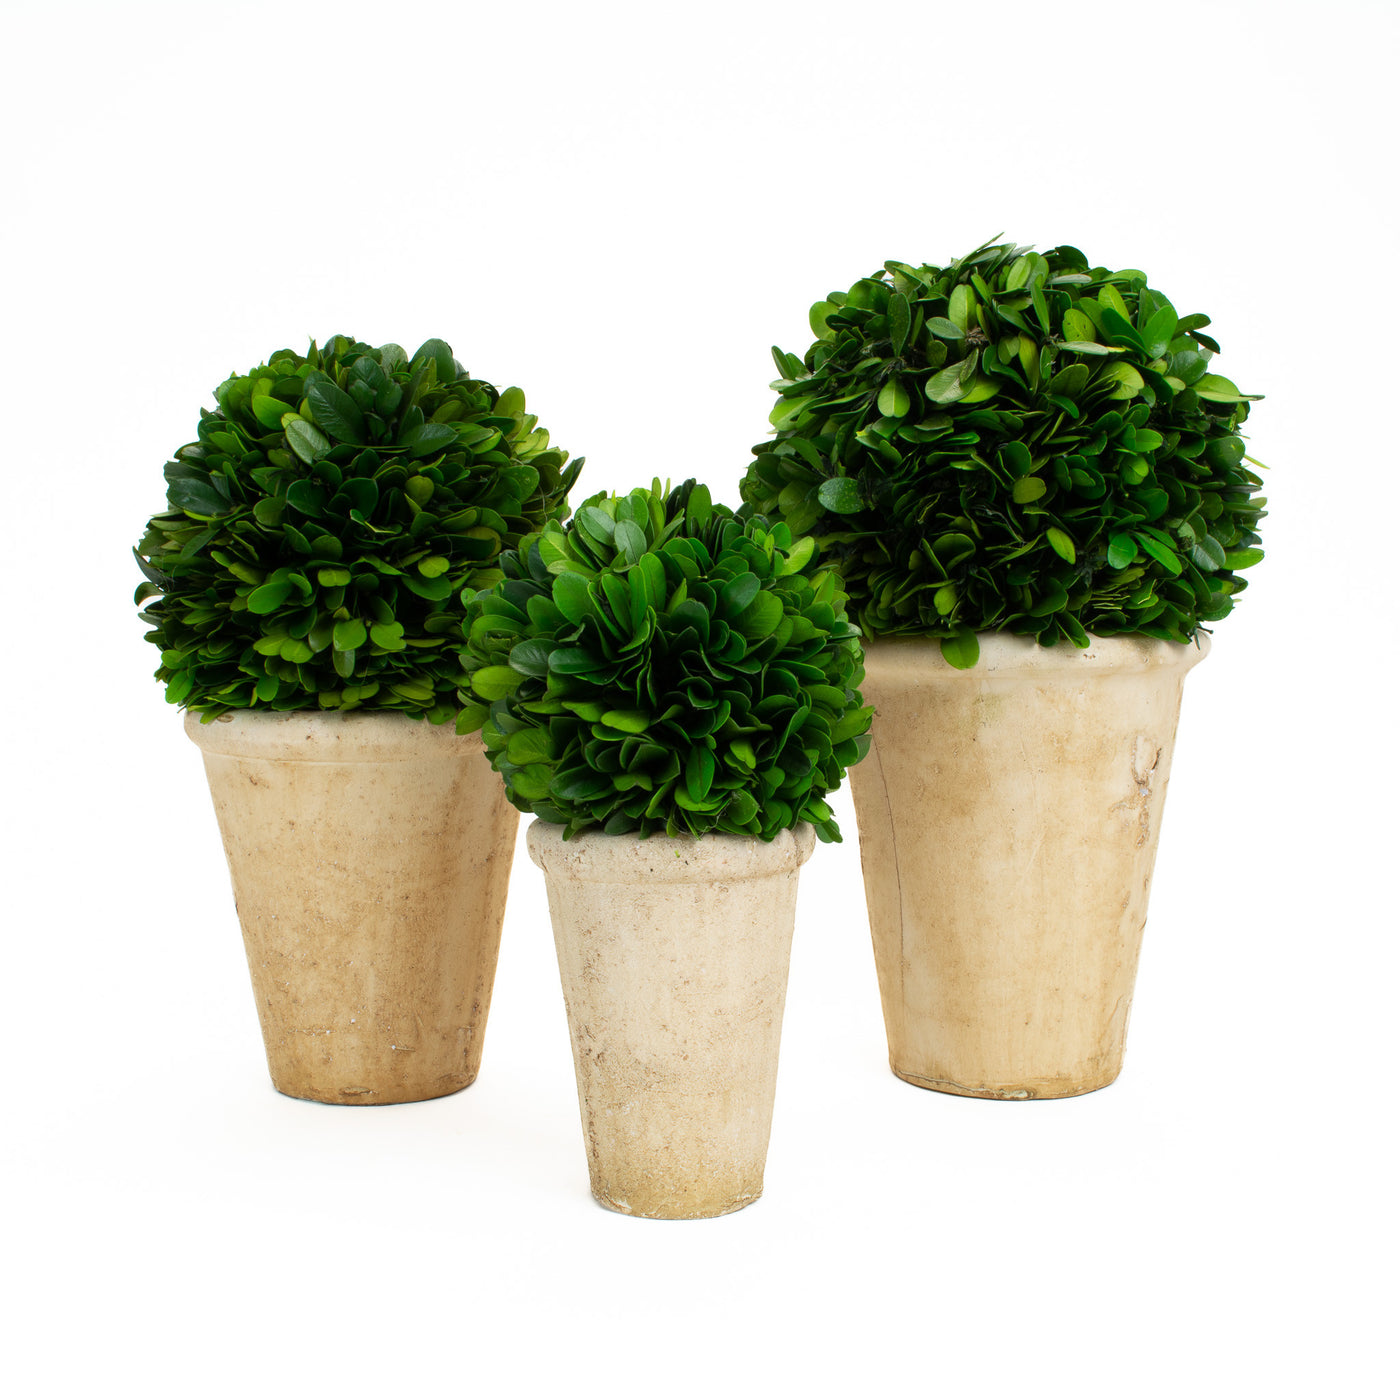 Preserved Boxwood Ball in Pot